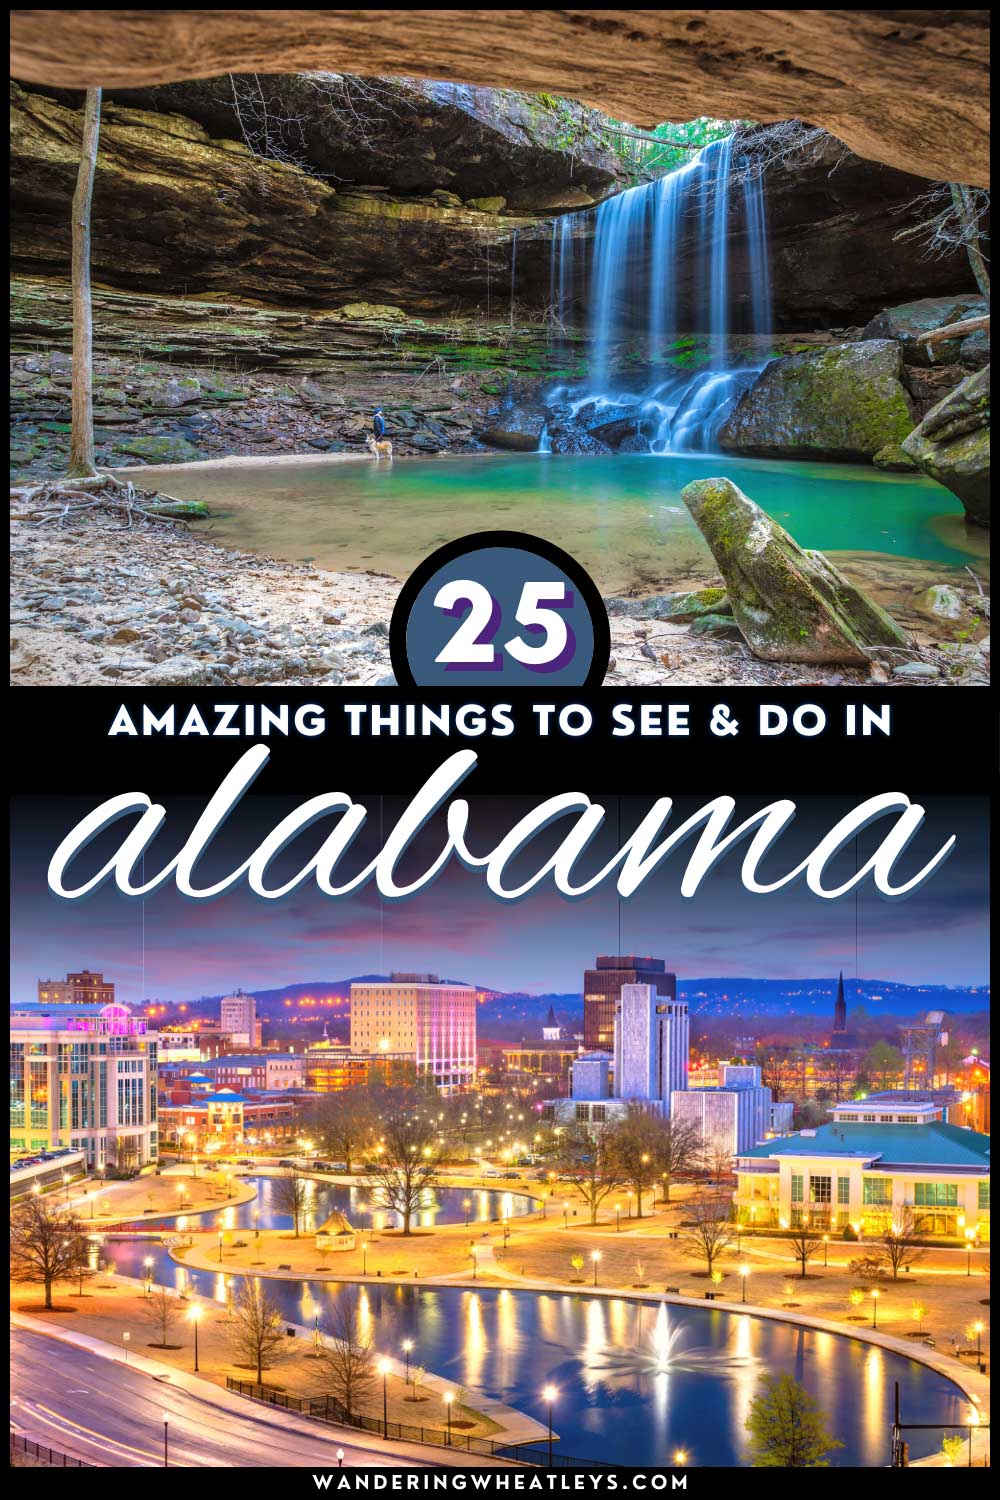 The Best Things to do in Alabama